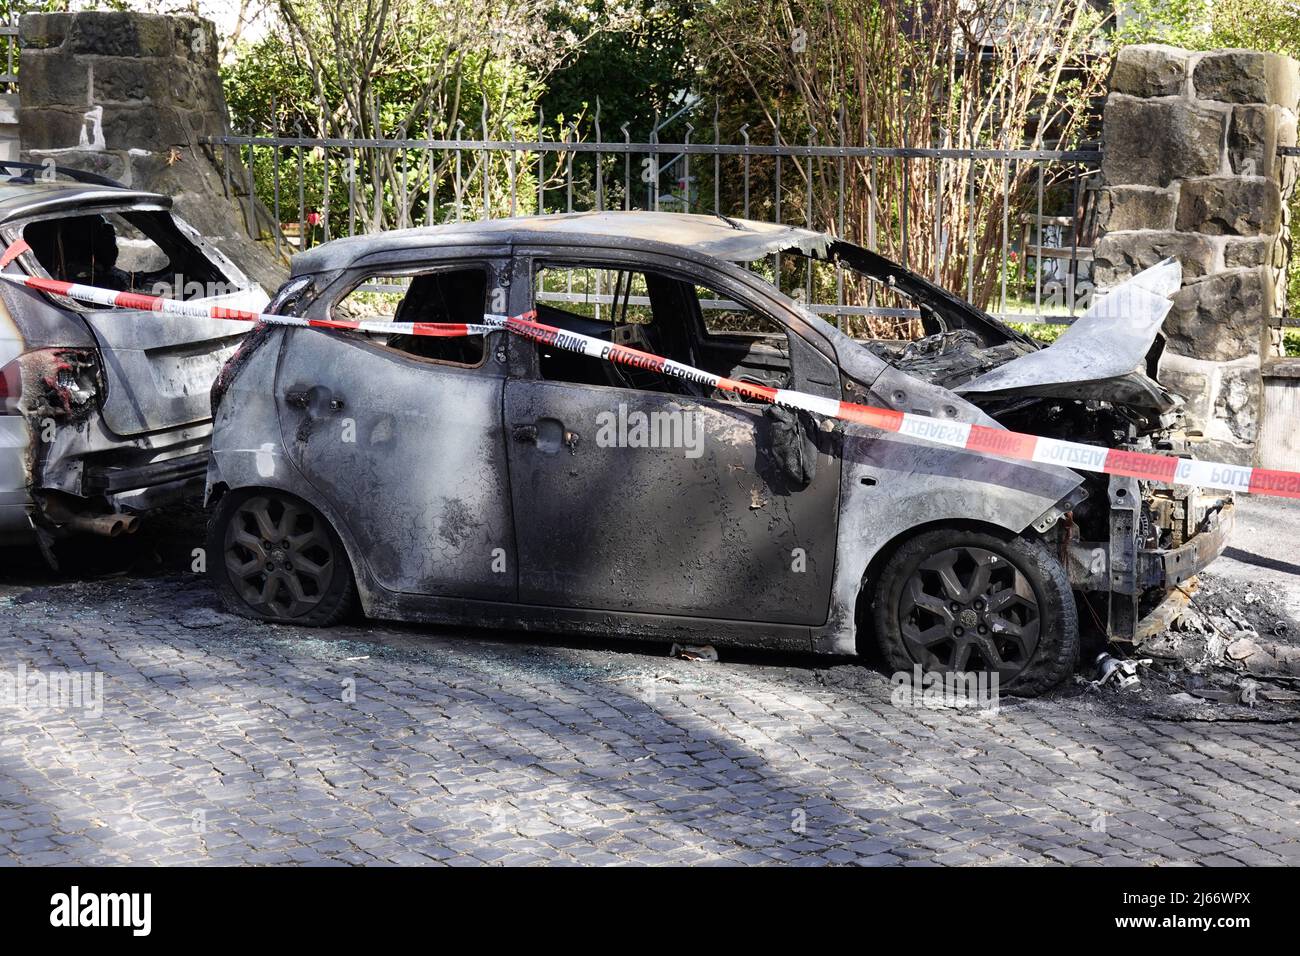 burnt out car wrecks behind police tape in residential street in Germany Stock Photo